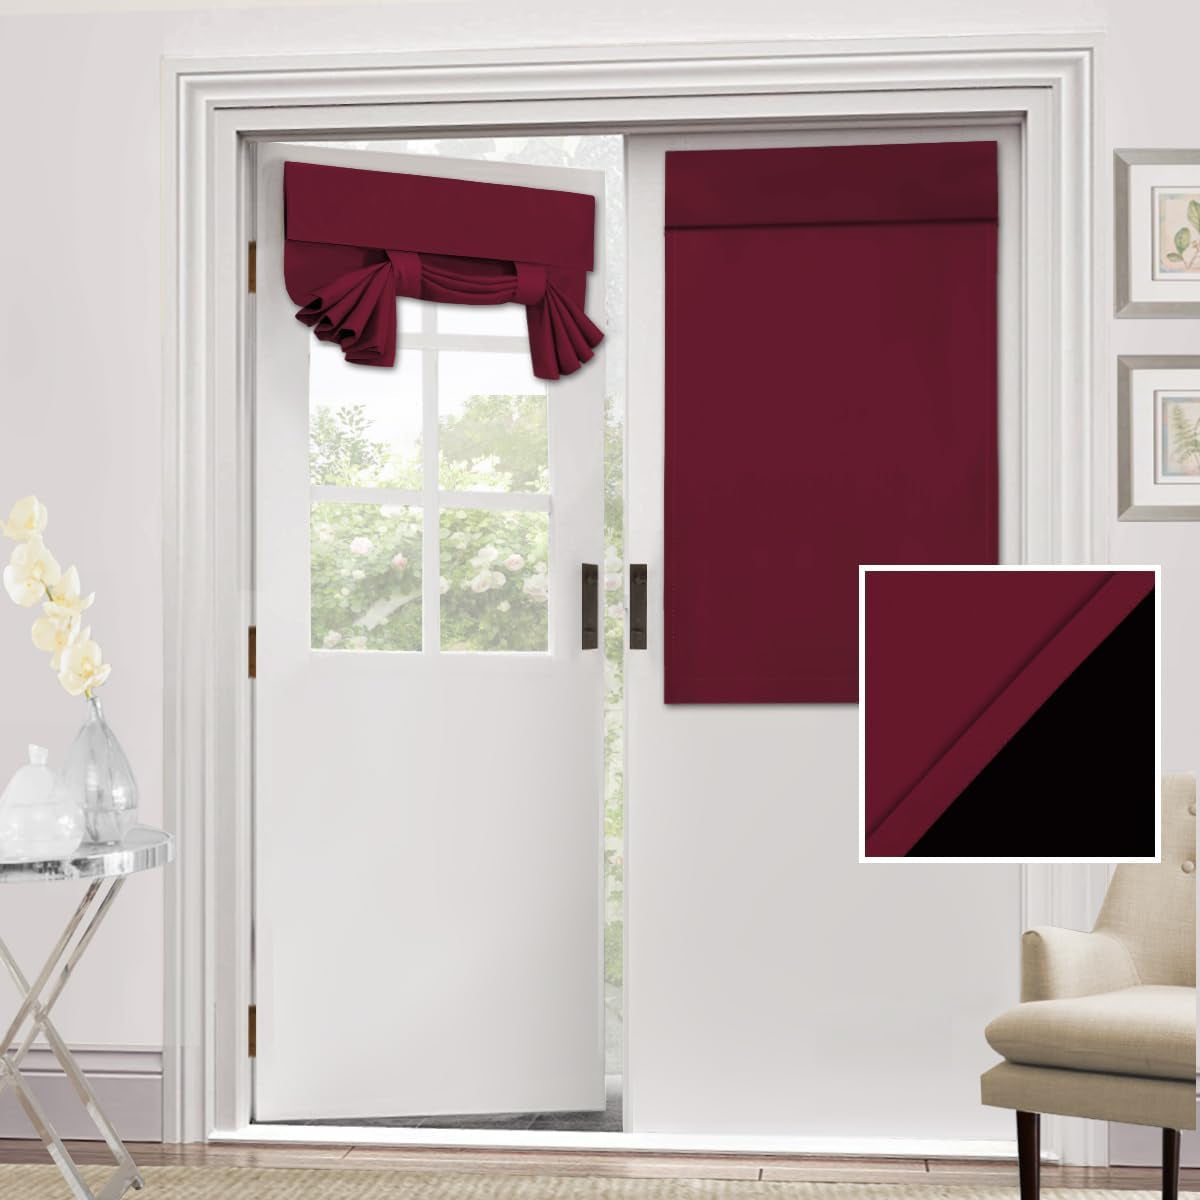 H.VERSAILTEX 100% Blackout Door Curtain - Small French Door Curtains for Doors Window, Thermal Insulated Adhesive Tricia Door Curtain, 26X40 Inches, 1 Panel, Pumice Stone  H.VERSAILTEX Burgundy 26"W X 40"L 